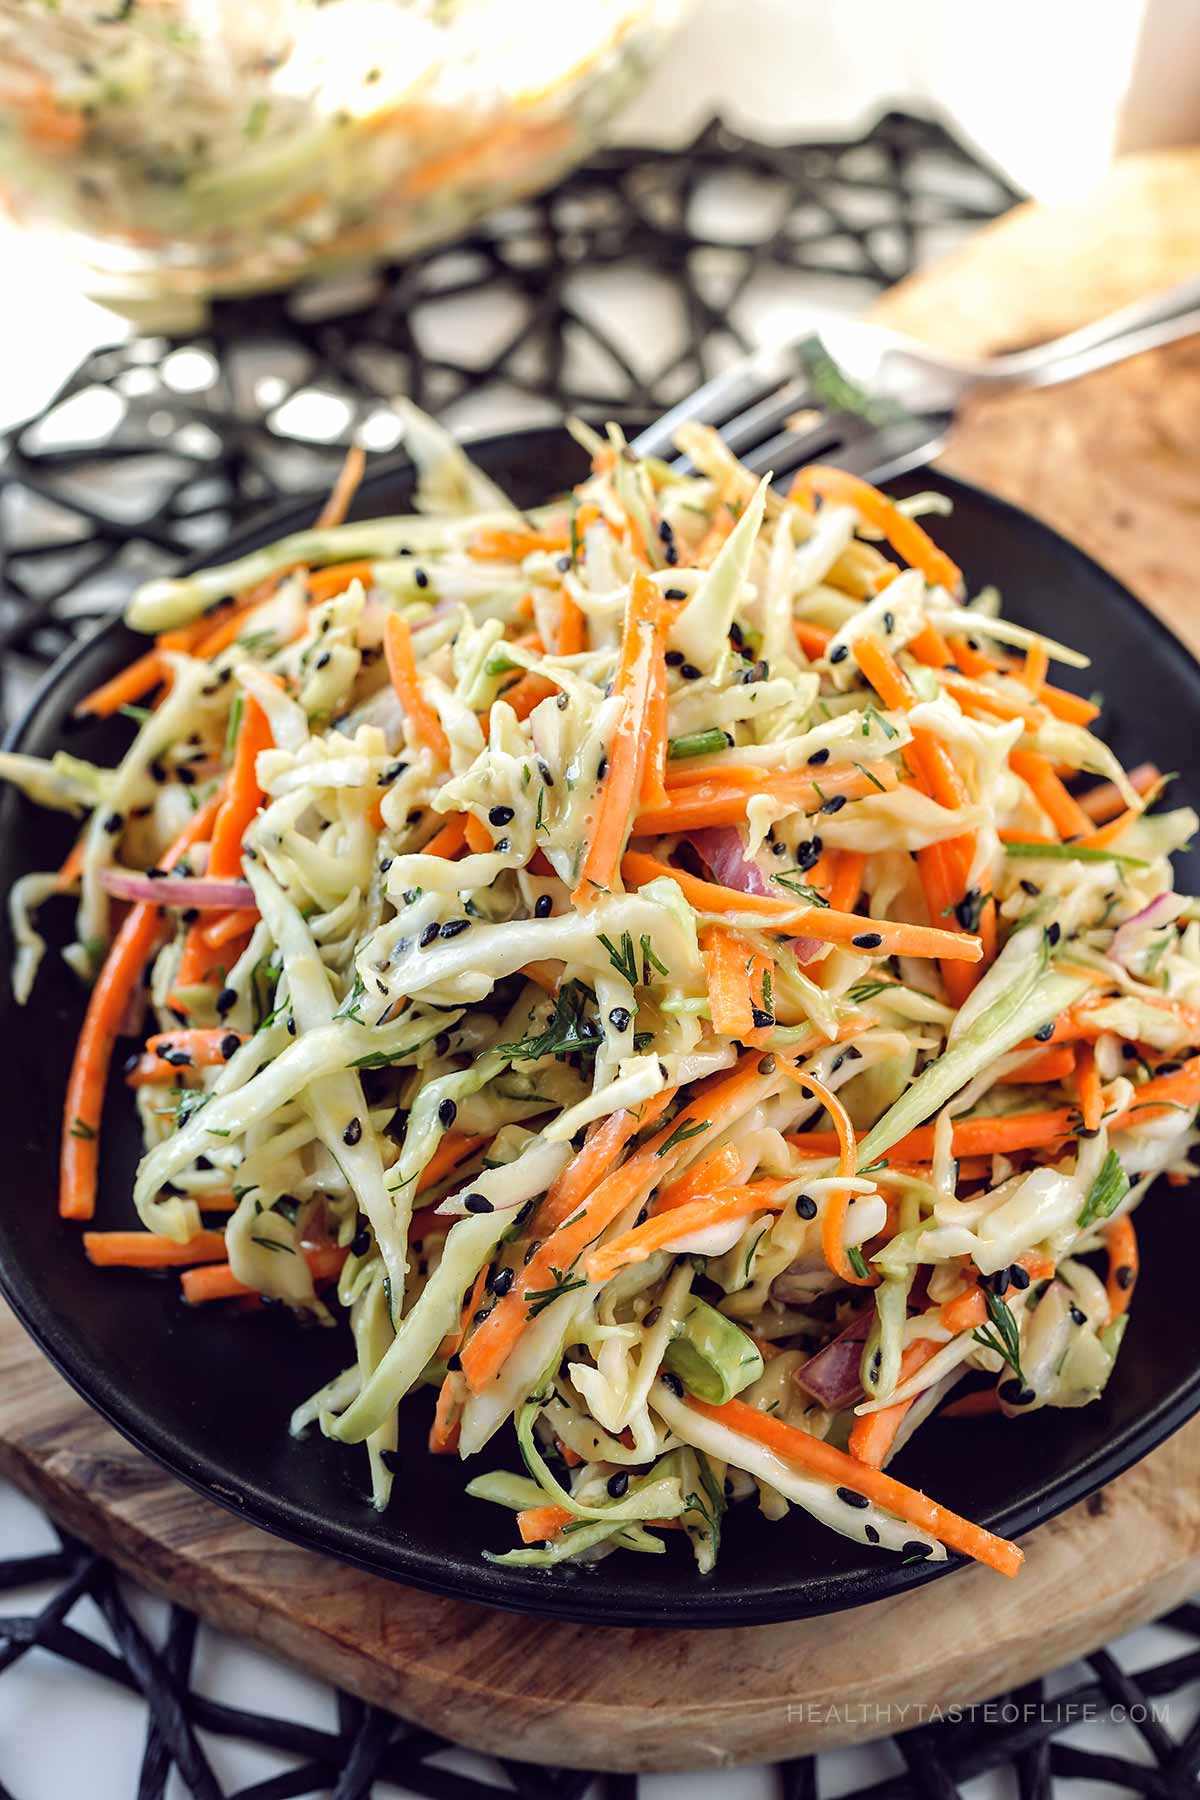 Cabbage and carrot salad served on a black plate.